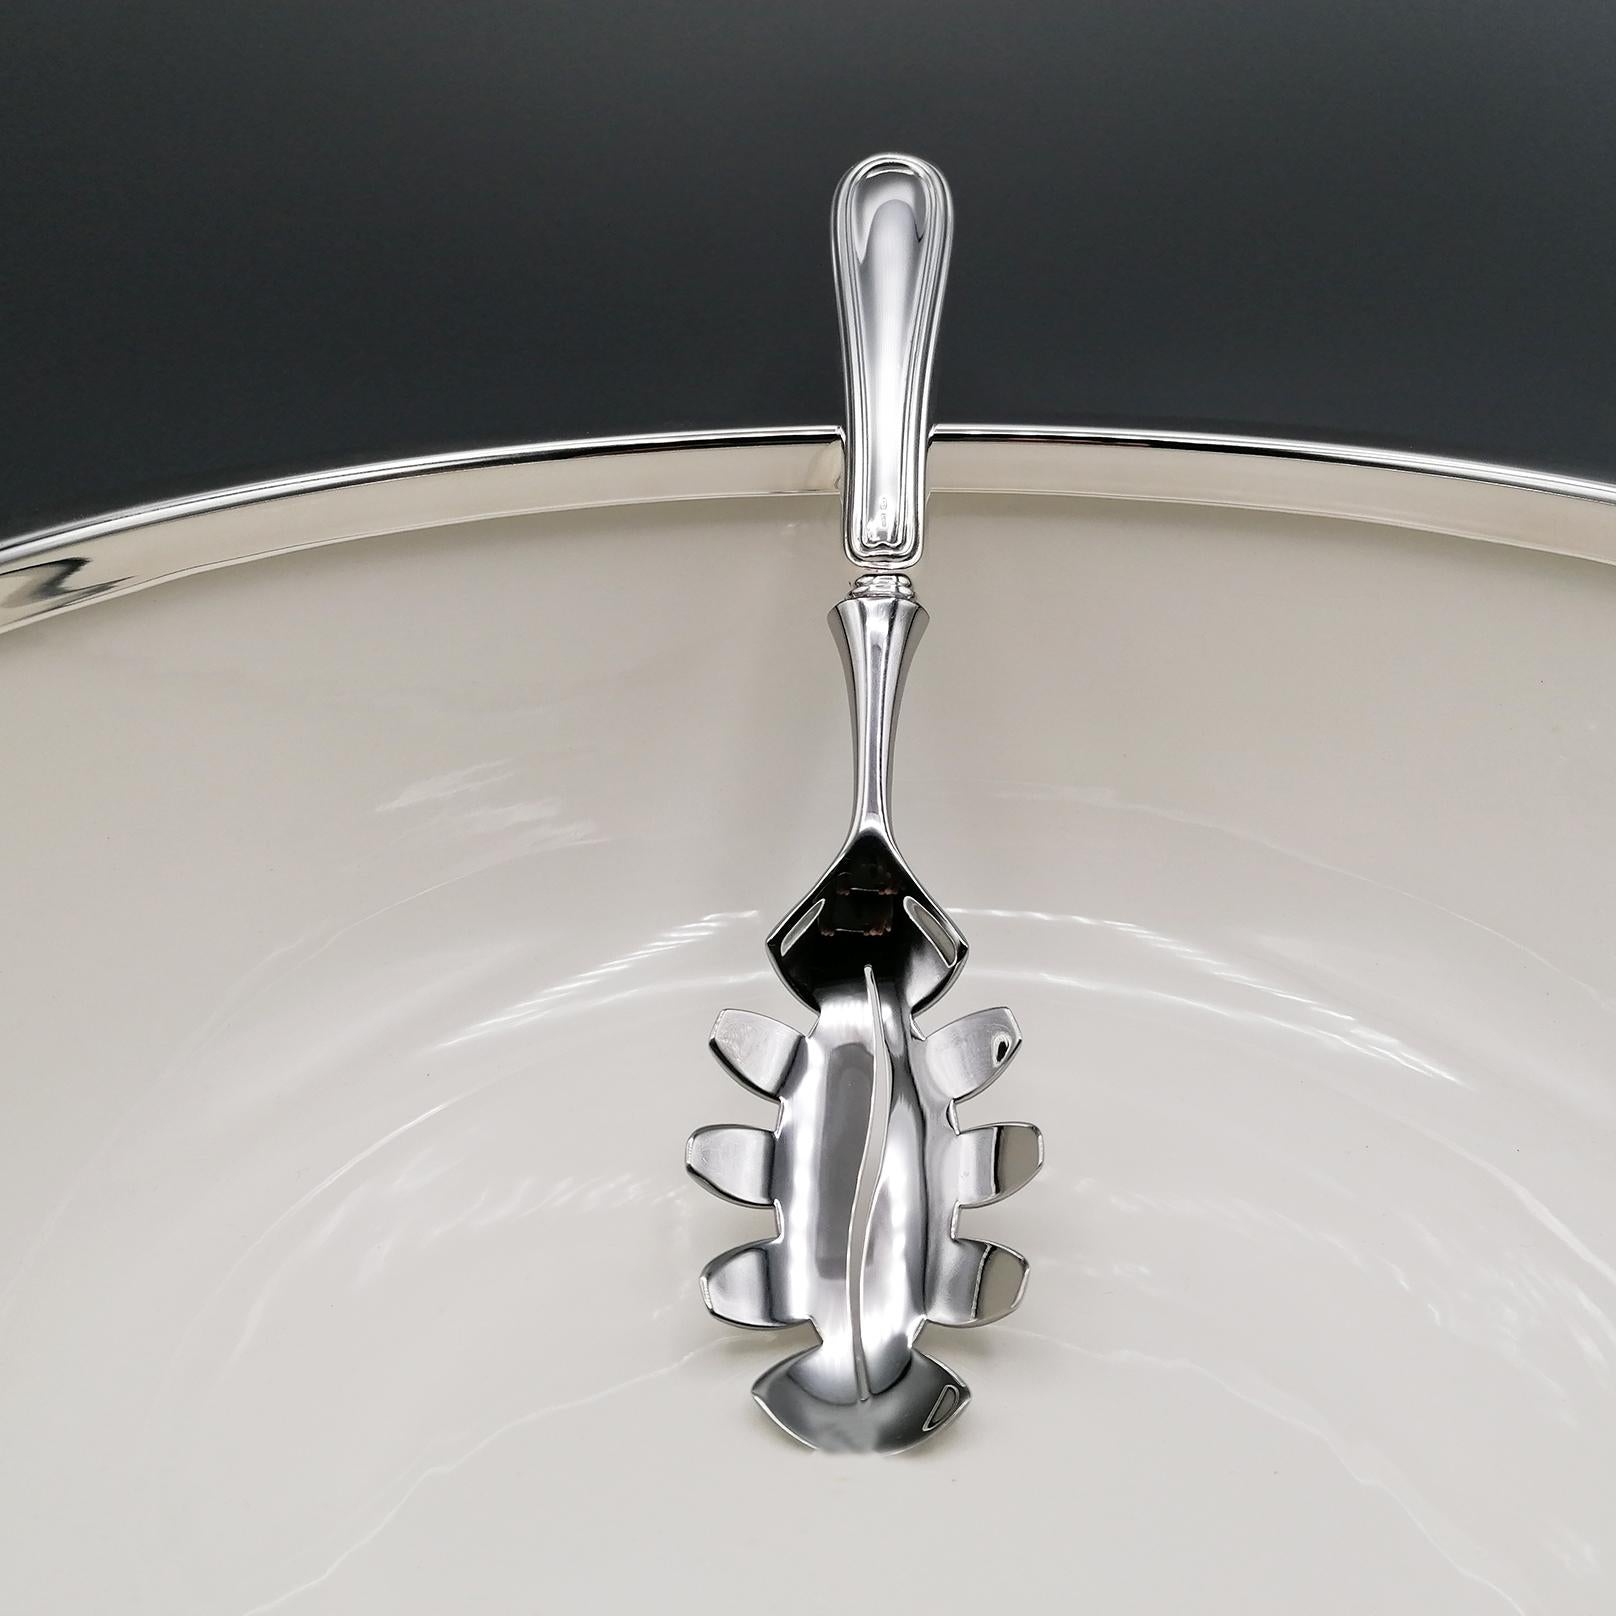 Hand-Crafted 20th Century Italian 800 Silver Spaghetti Bowl with Ceramic and Silver Spoon For Sale